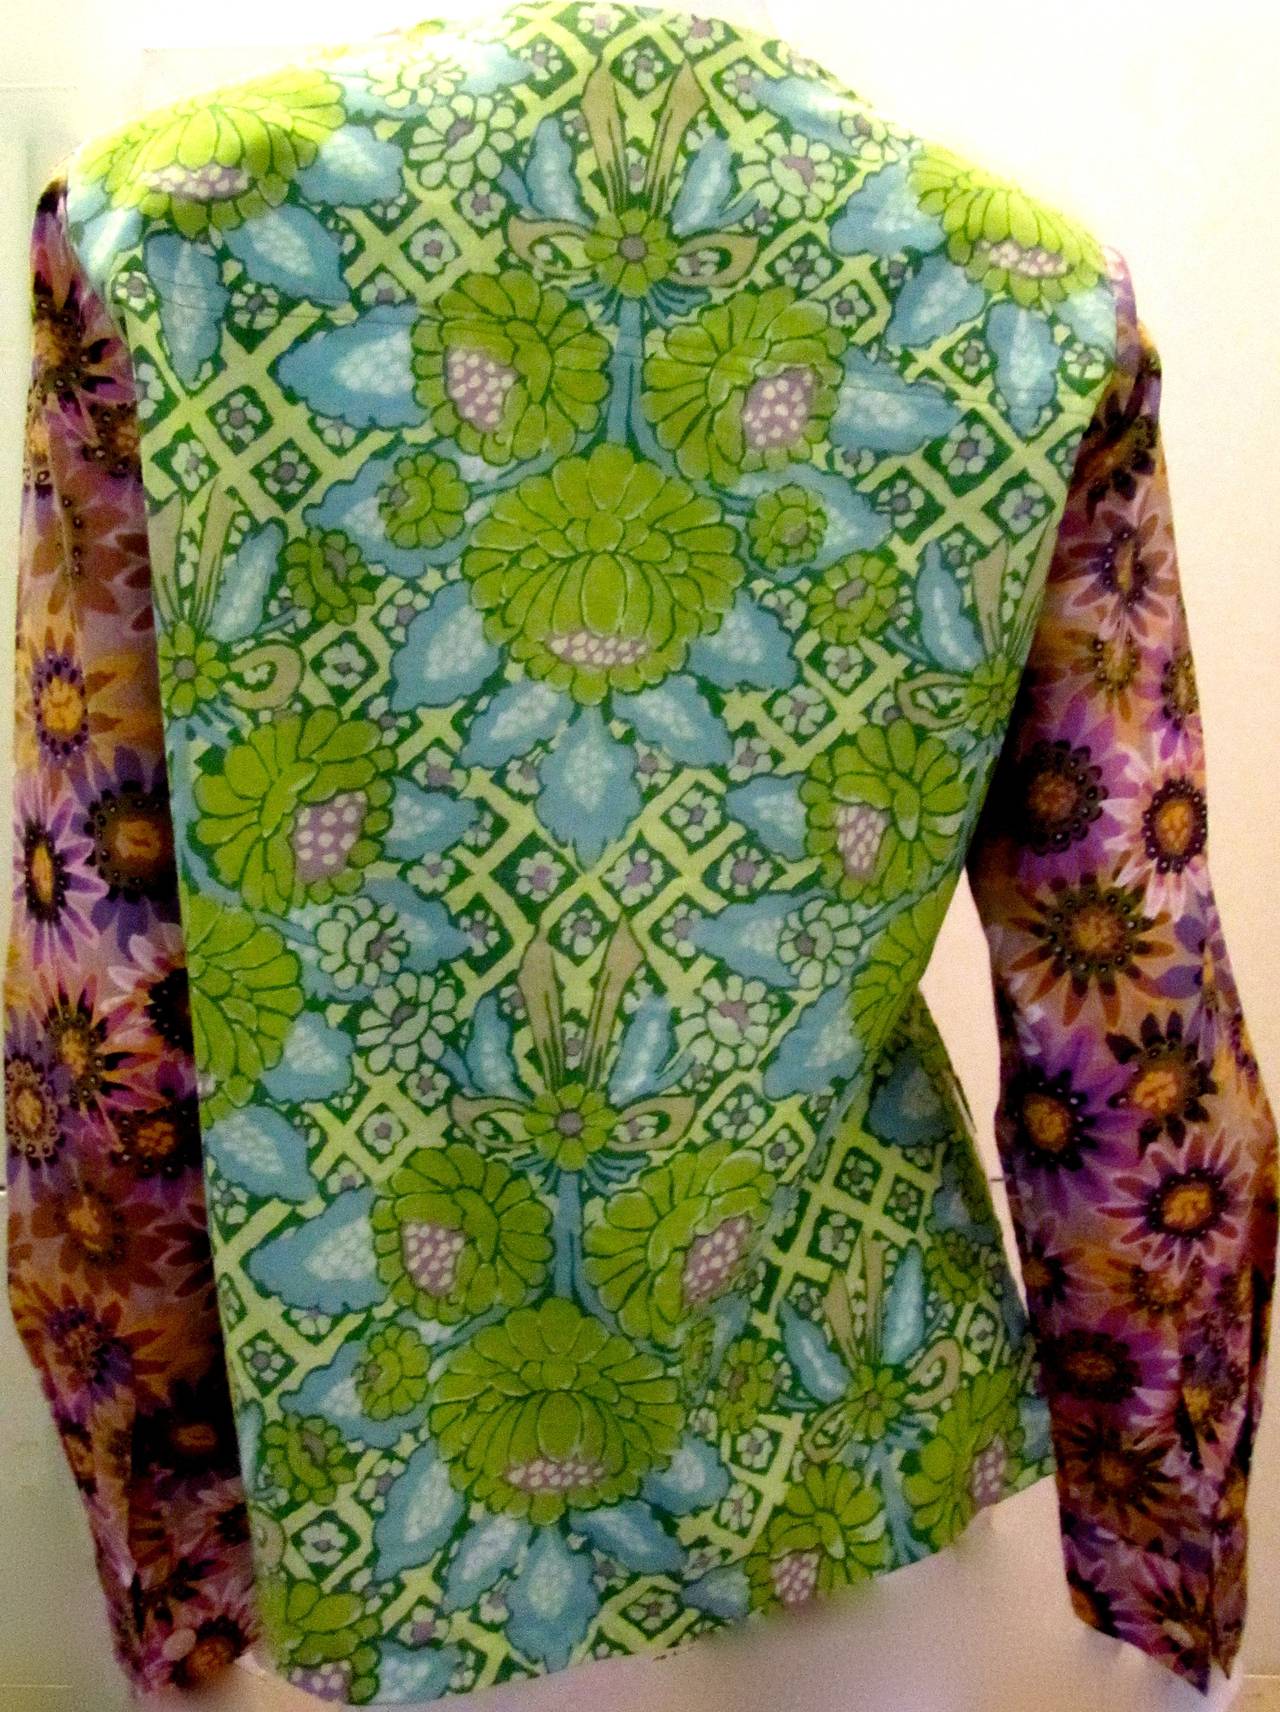 Koos Van Den Akker shirt from the 1970's. Gorgeous floral design print consisting of green, purple, yellow, and blue. The shirt has ruffles down the front of the shirt. The flower design on the exterior of the shirt is classic Koos at its very